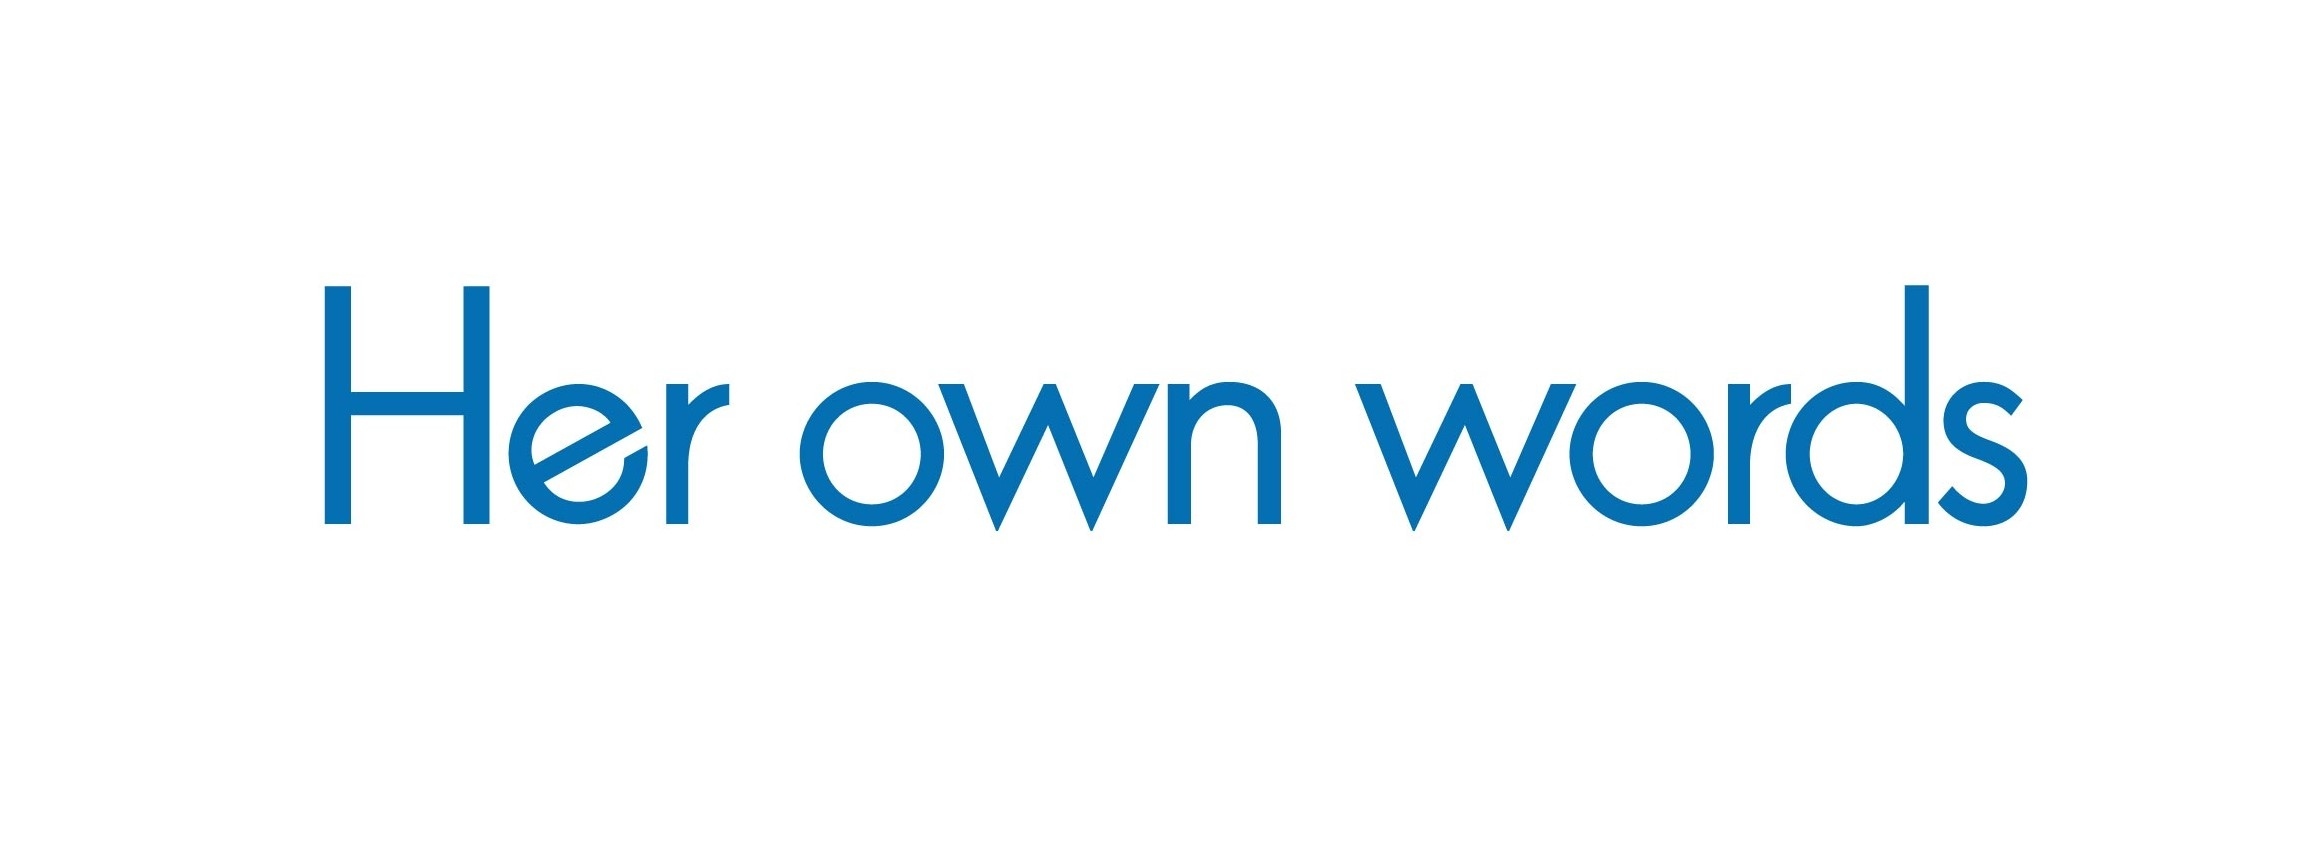 Her own words Logo